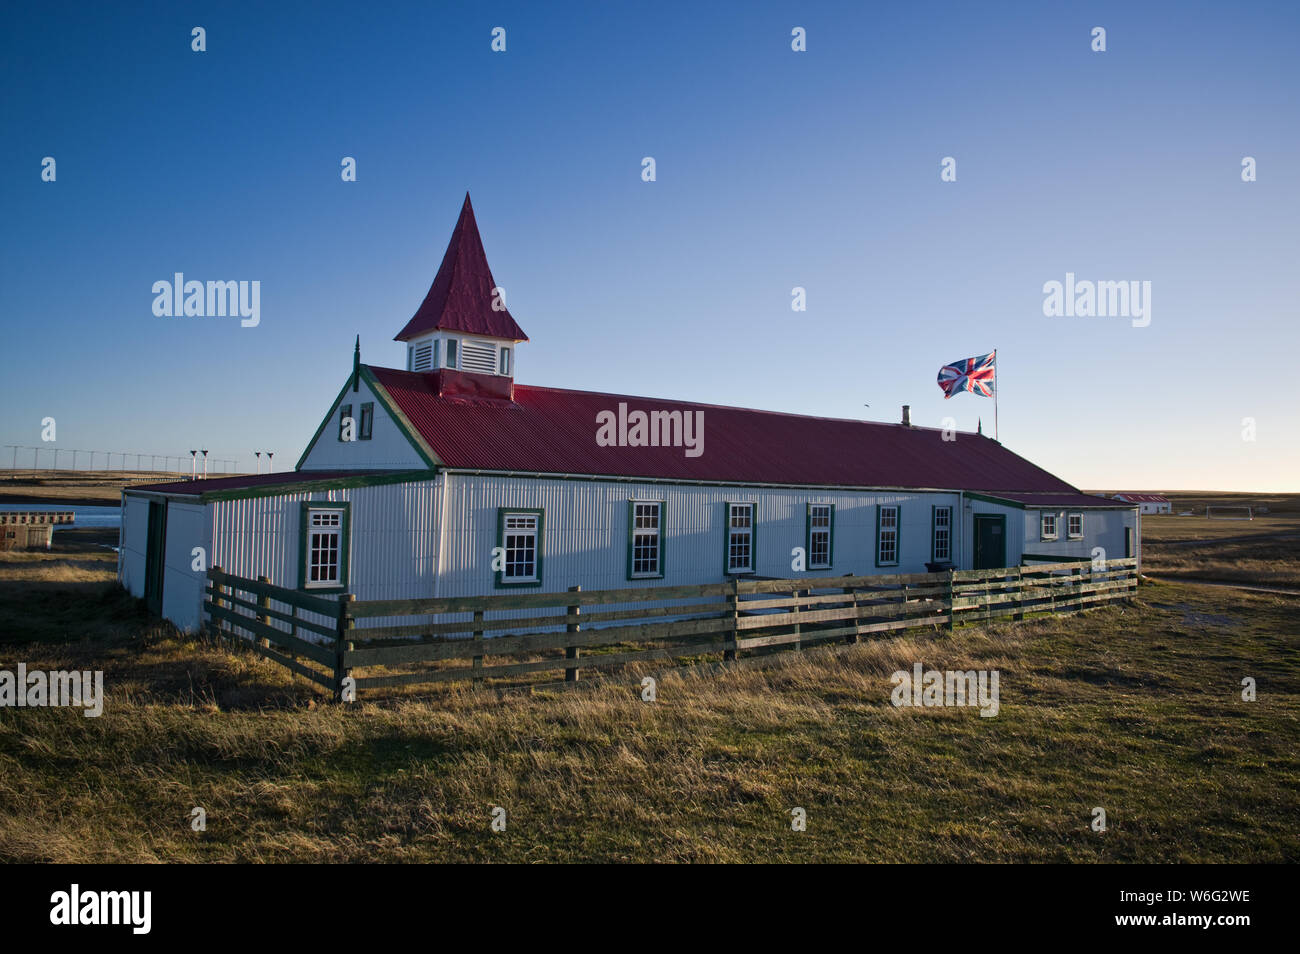 The town hall at Goose Green, second largest settlement on the Falkland Islands, where islanders were held prisoner by Argentine forces in 1982. Stock Photo